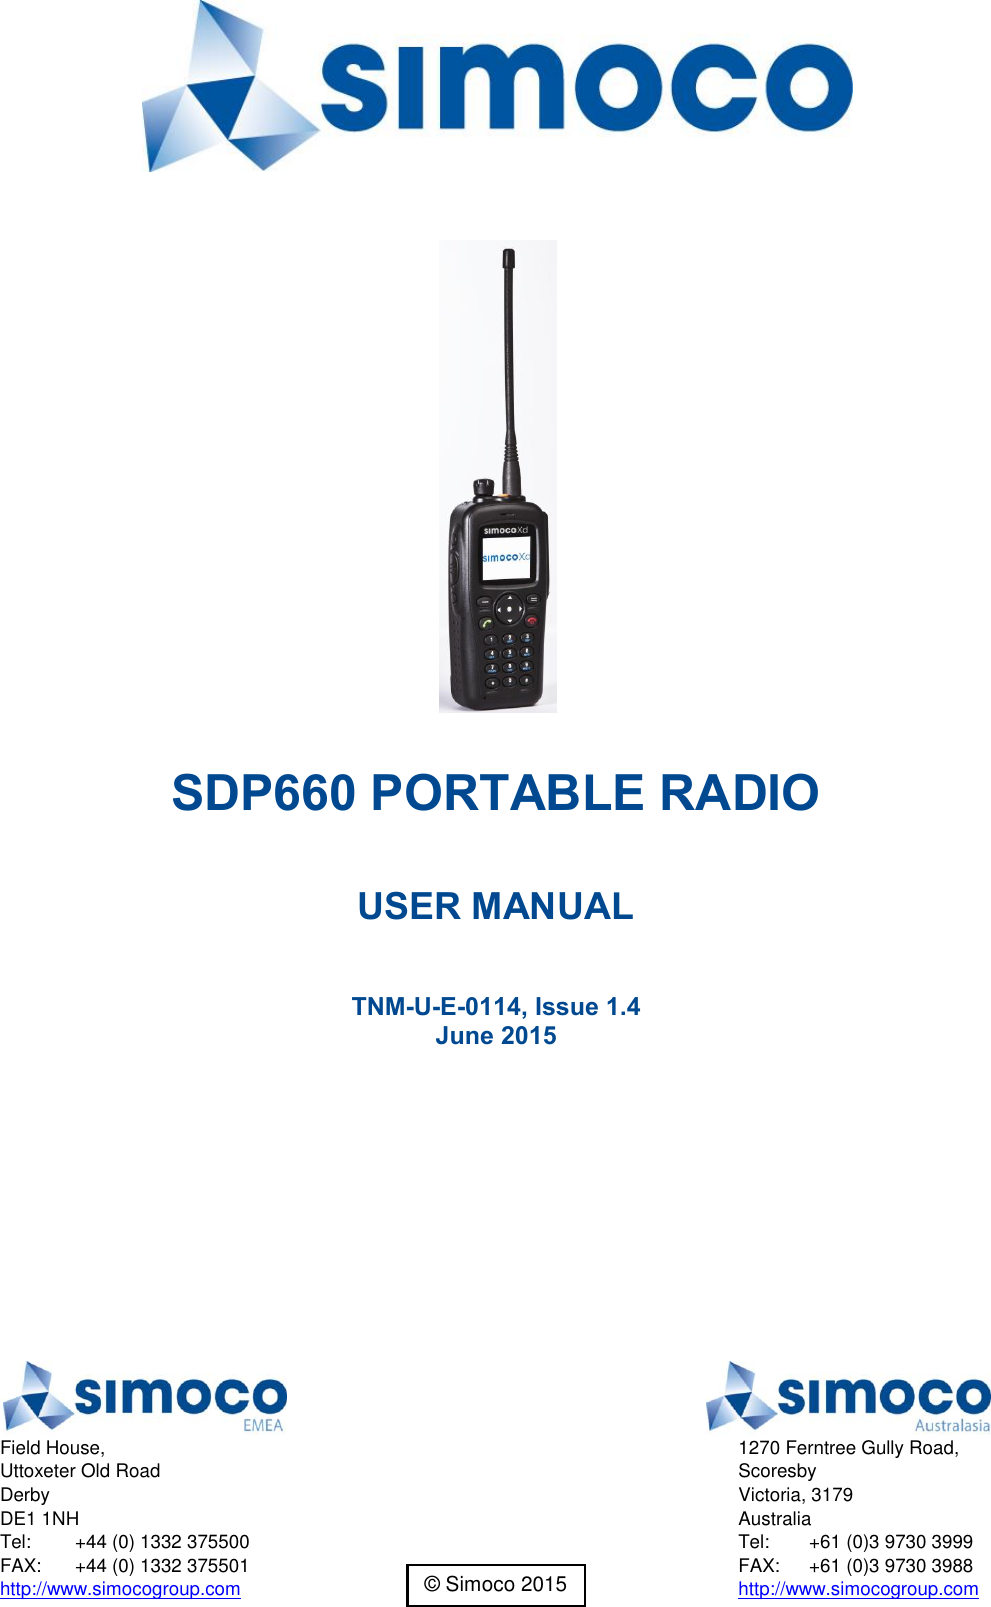   SDP660 PORTABLE RADIO  USER MANUAL  TNM-U-E-0114, Issue 1.4 June 2015     Field House, Uttoxeter Old Road Derby DE1 1NH Tel:  +44 (0) 1332 375500 FAX:  +44 (0) 1332 375501 http://www.simocogroup.com  1270 Ferntree Gully Road, Scoresby Victoria, 3179 Australia Tel:  +61 (0)3 9730 3999 FAX:  +61 (0)3 9730 3988 http://www.simocogroup.com © Simoco 2015 